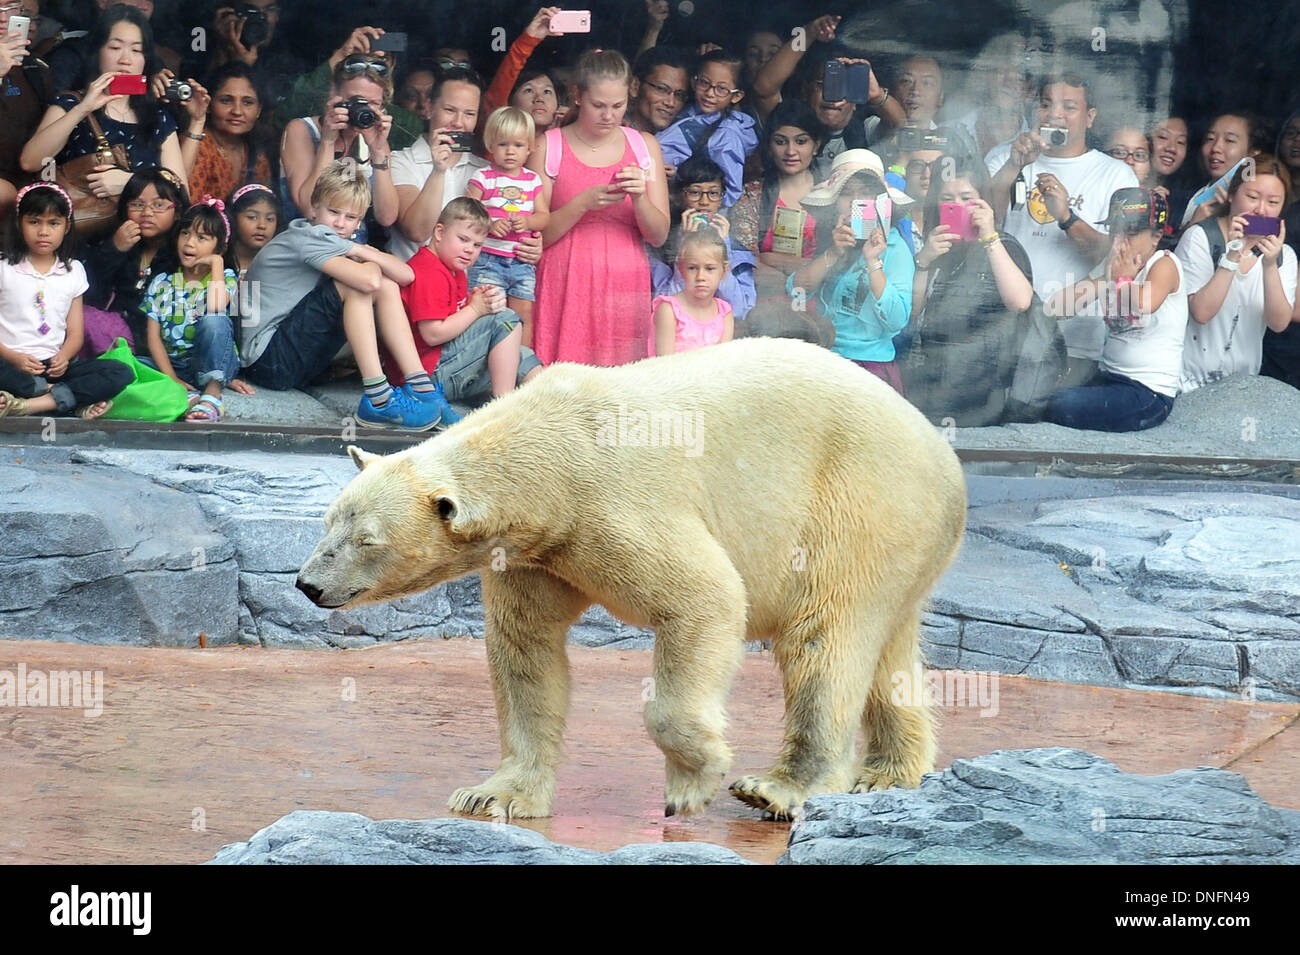 Singapore. 26th Dec, 2013. Visitors watch polar bear Inuka at the Singapore Zoo on Dec. 26, 2013. The Singapore Zoo held a birthday celebration for 23-year-old Inuka, the first polar bear born in the tropics. Credit:  Then Chih Wey/Xinhua/Alamy Live News Stock Photo